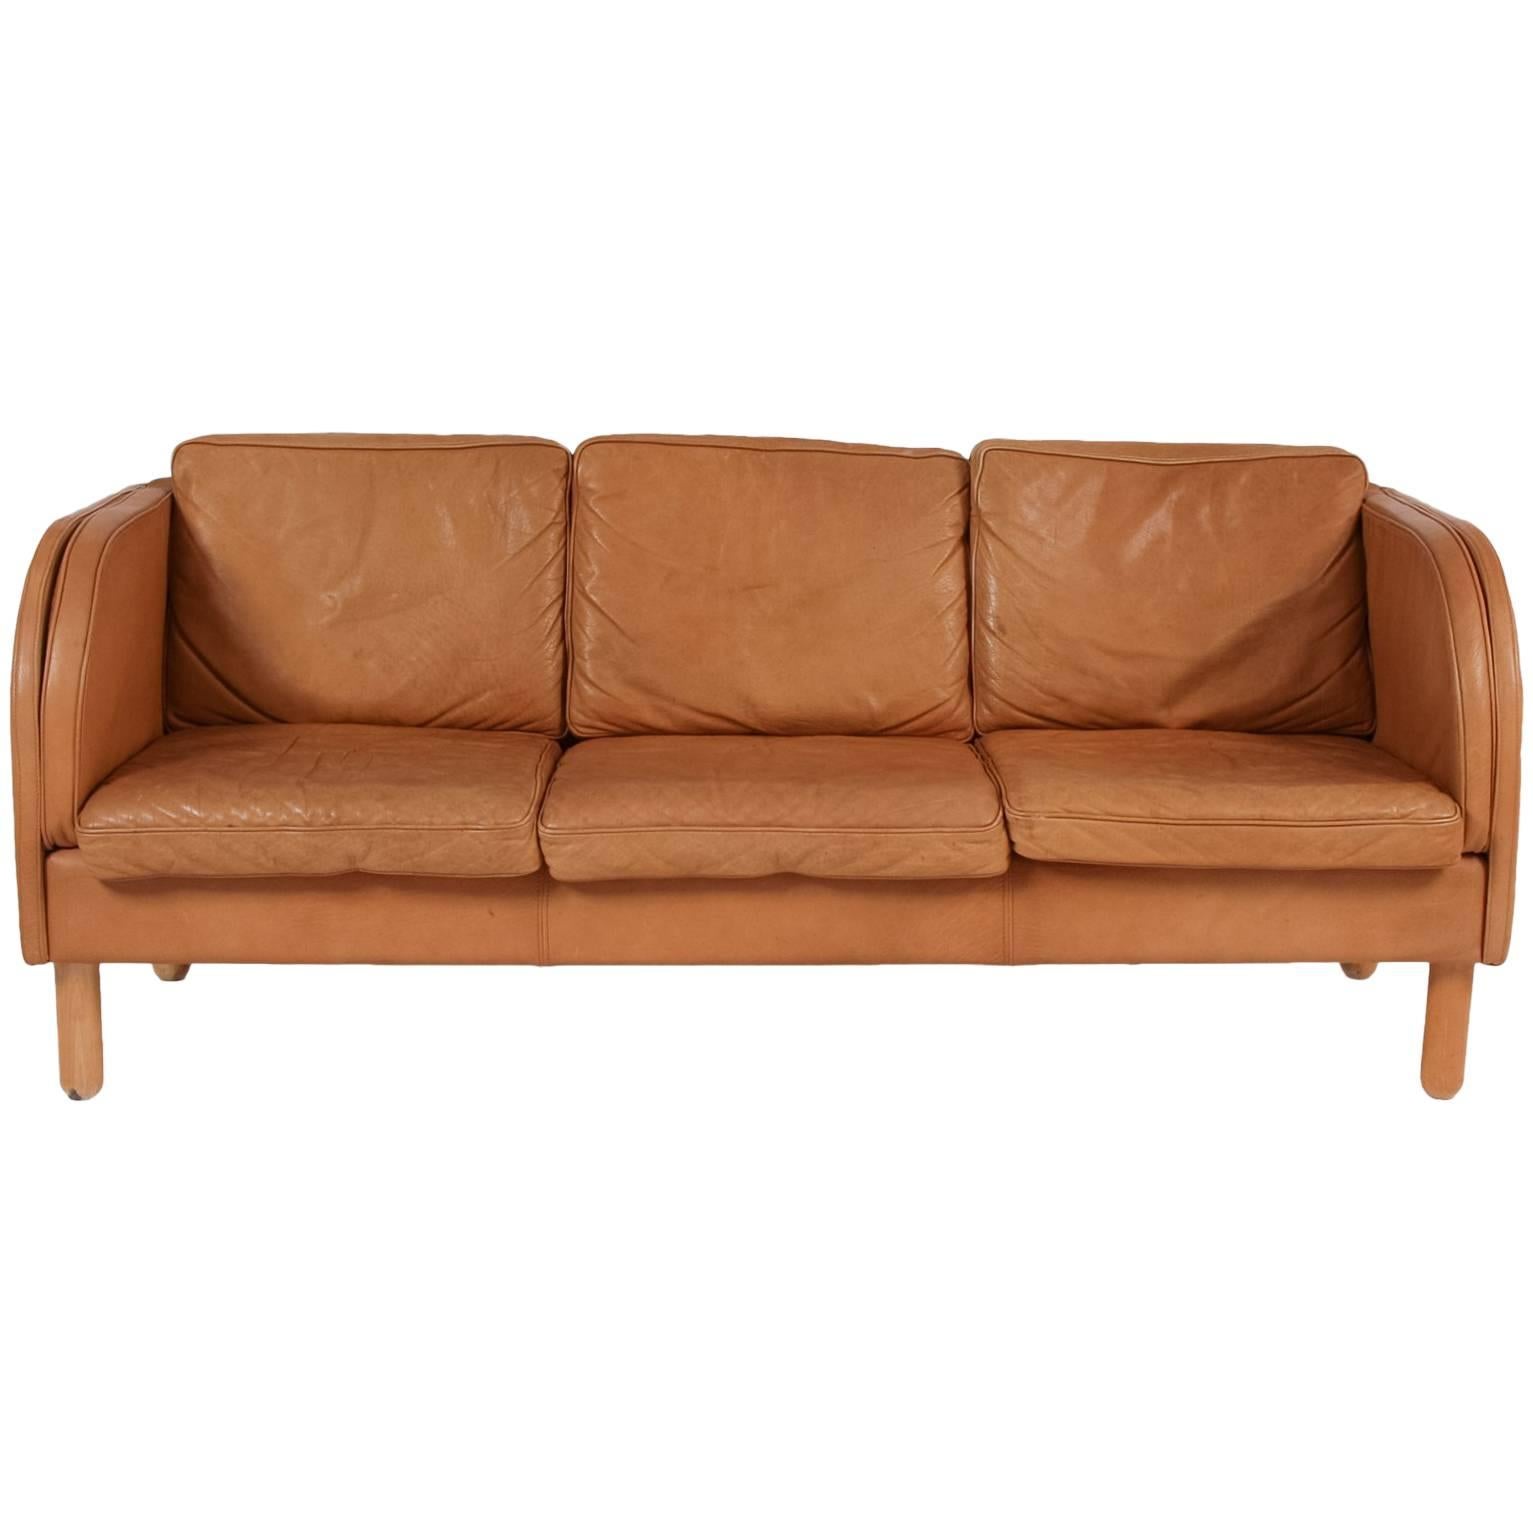 Vintage Tan Leather Sofa by Stouby